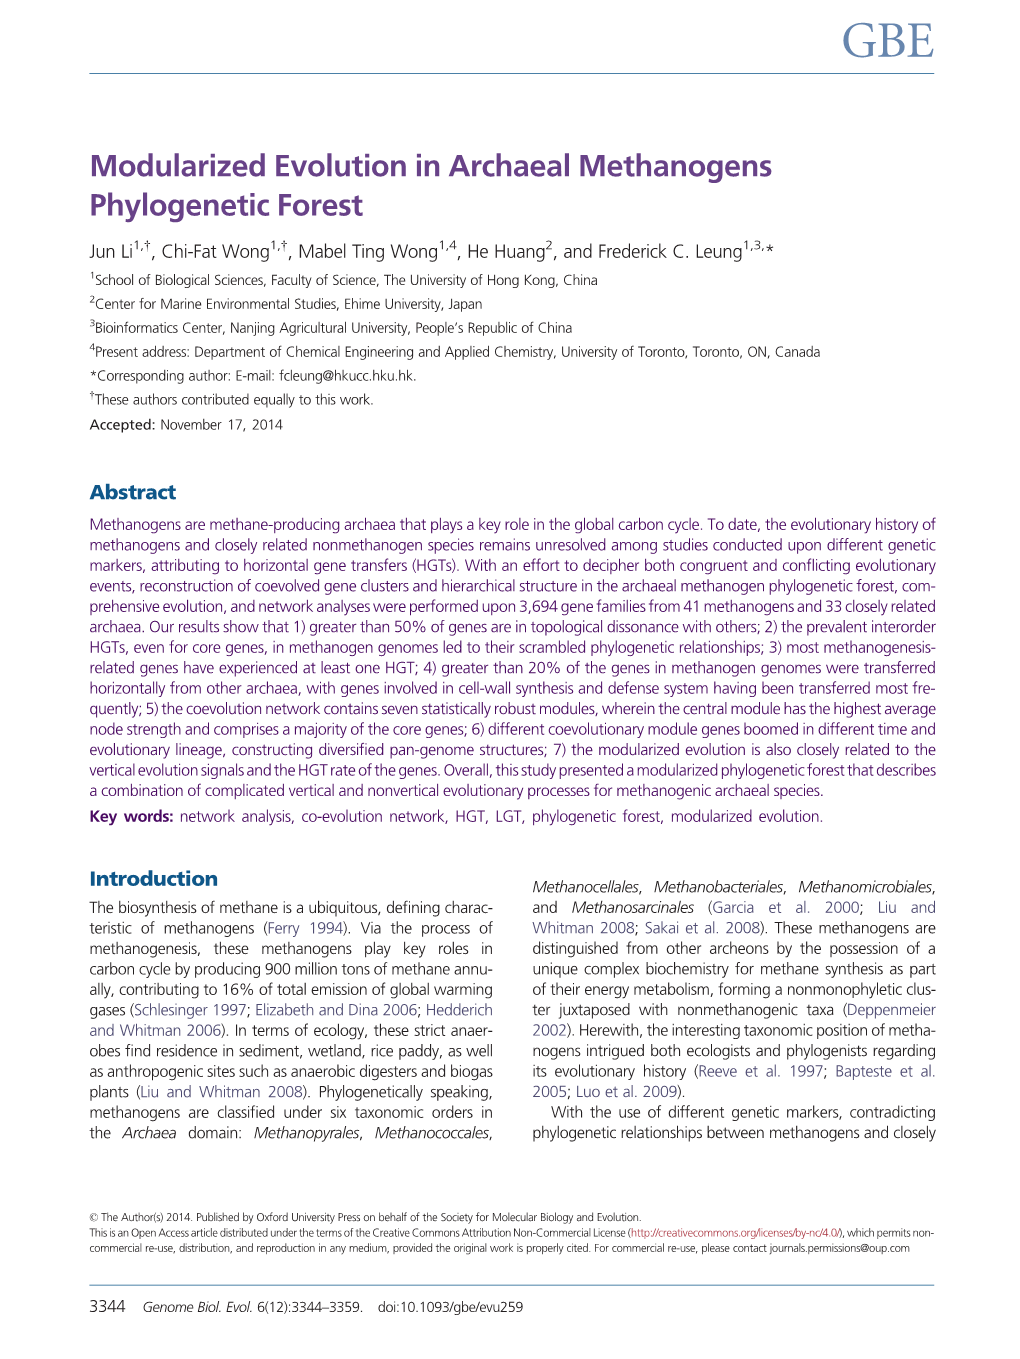 Modularized Evolution in Archaeal Methanogens Phylogenetic Forest